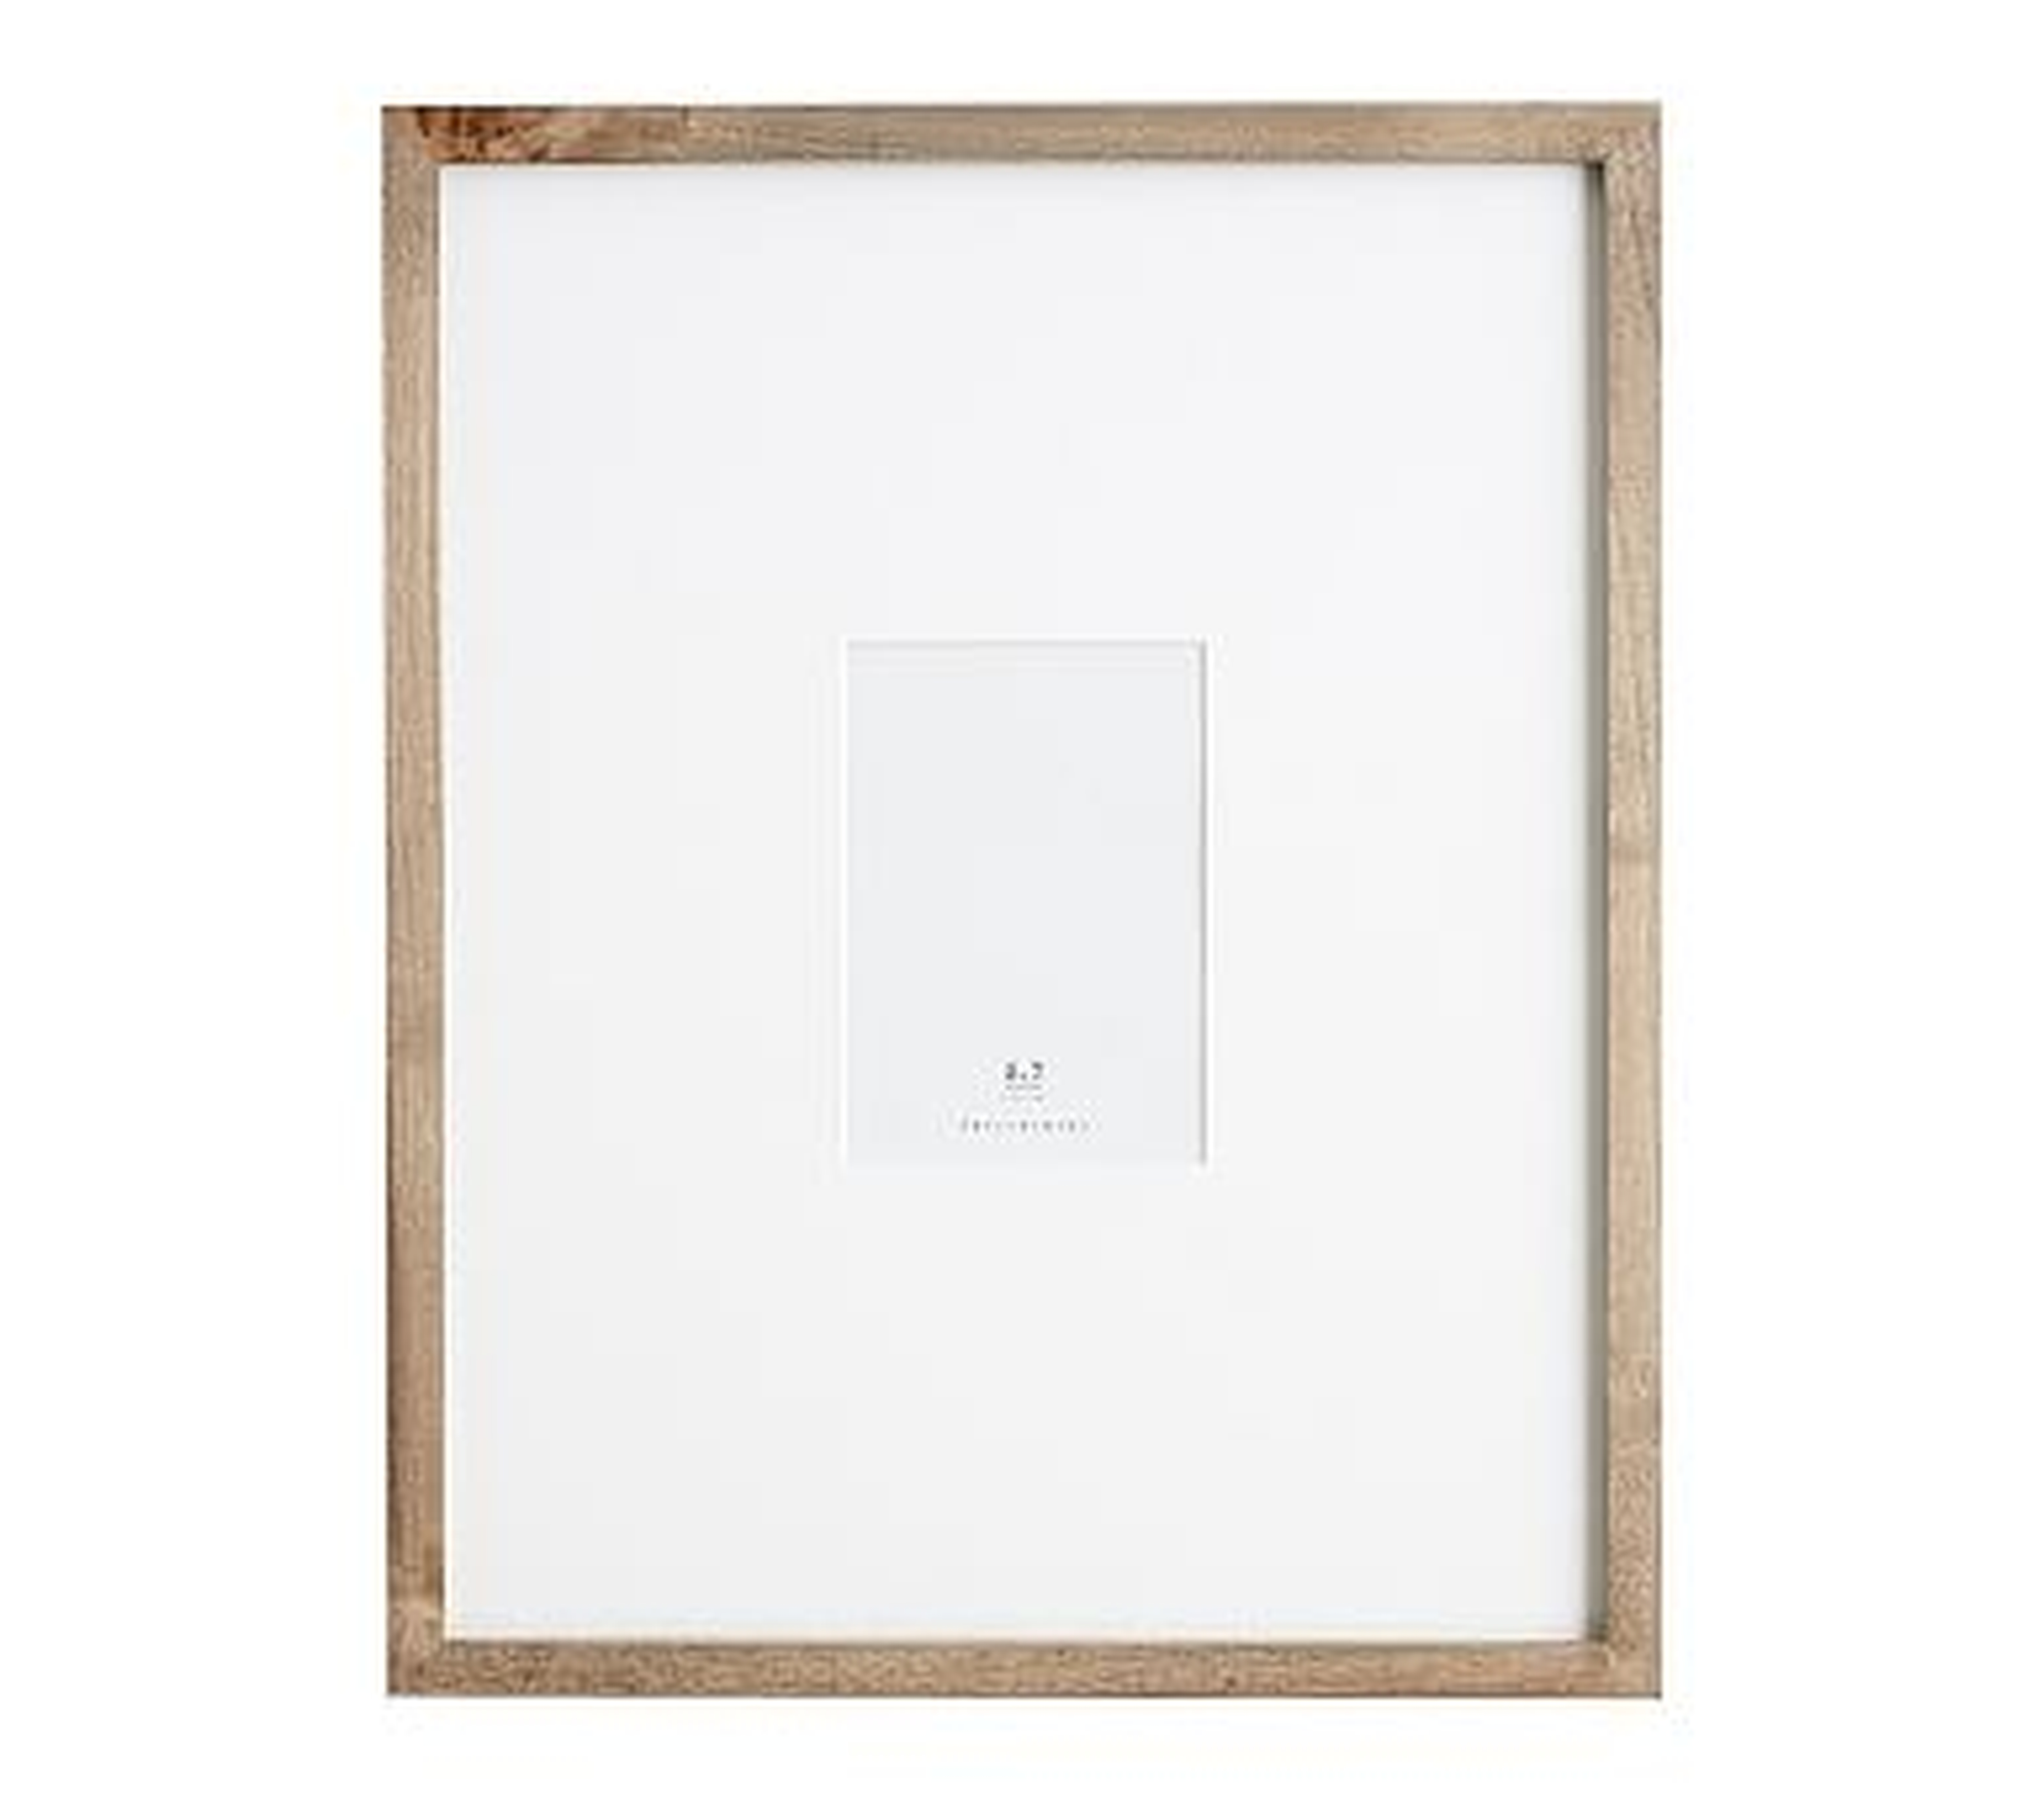 Wood Gallery Oversized Frame, 5x7 - Gray - Pottery Barn